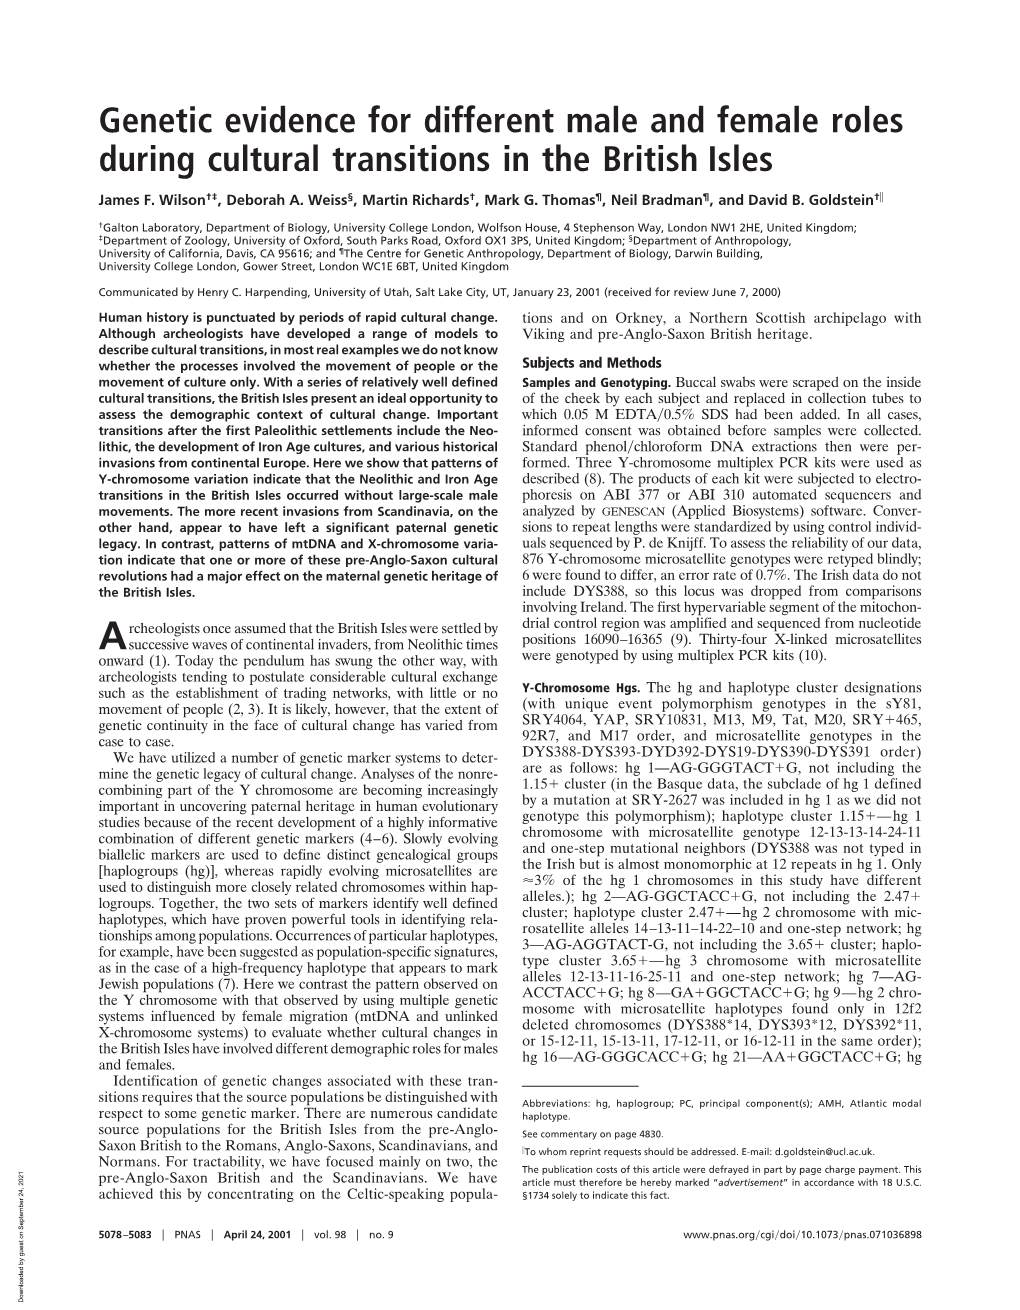 Genetic Evidence for Different Male and Female Roles During Cultural Transitions in the British Isles